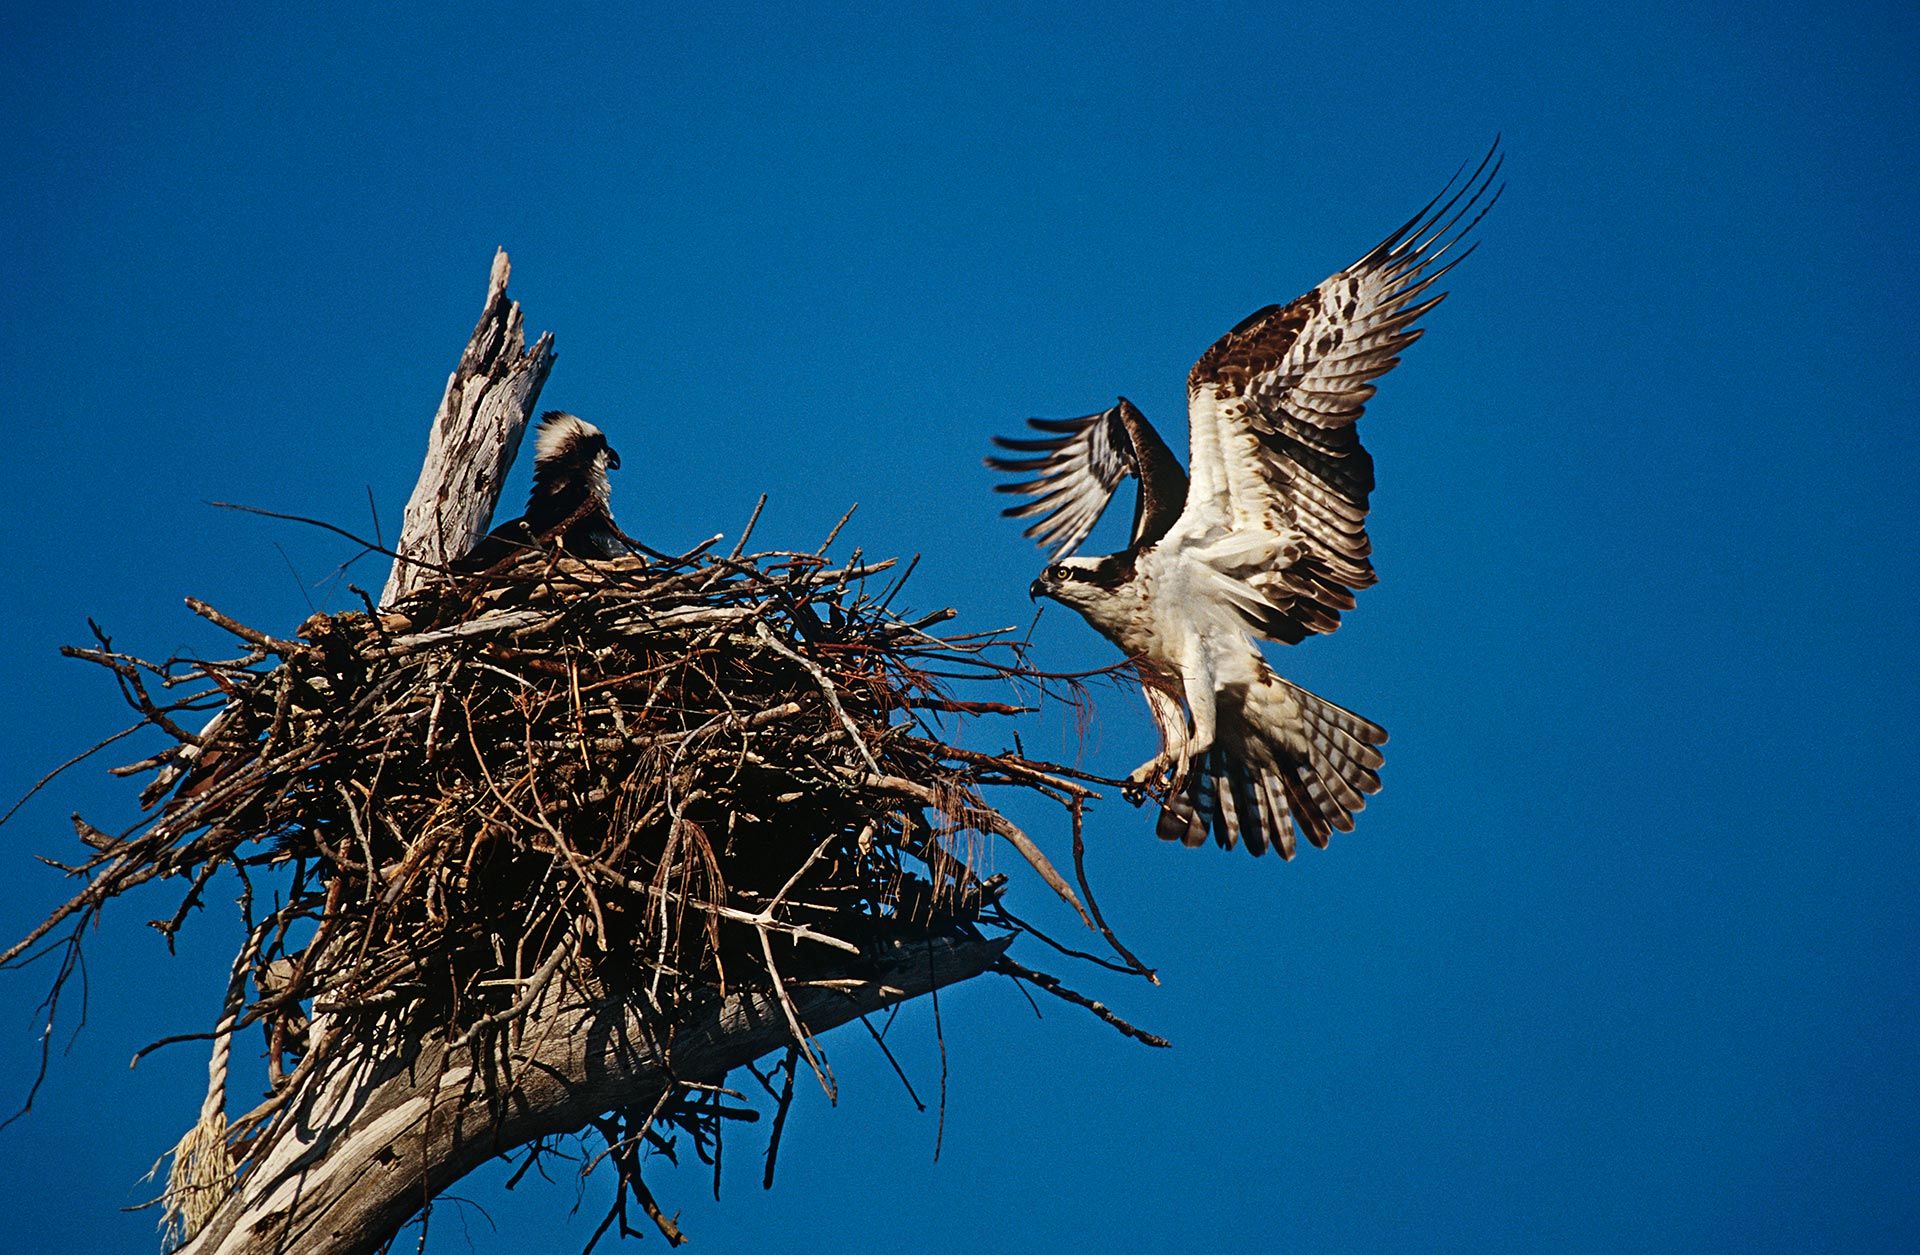 Pilgrim Pest Professionals is osprey control company that offers osprey removal services throughout MA and Cape Cod.